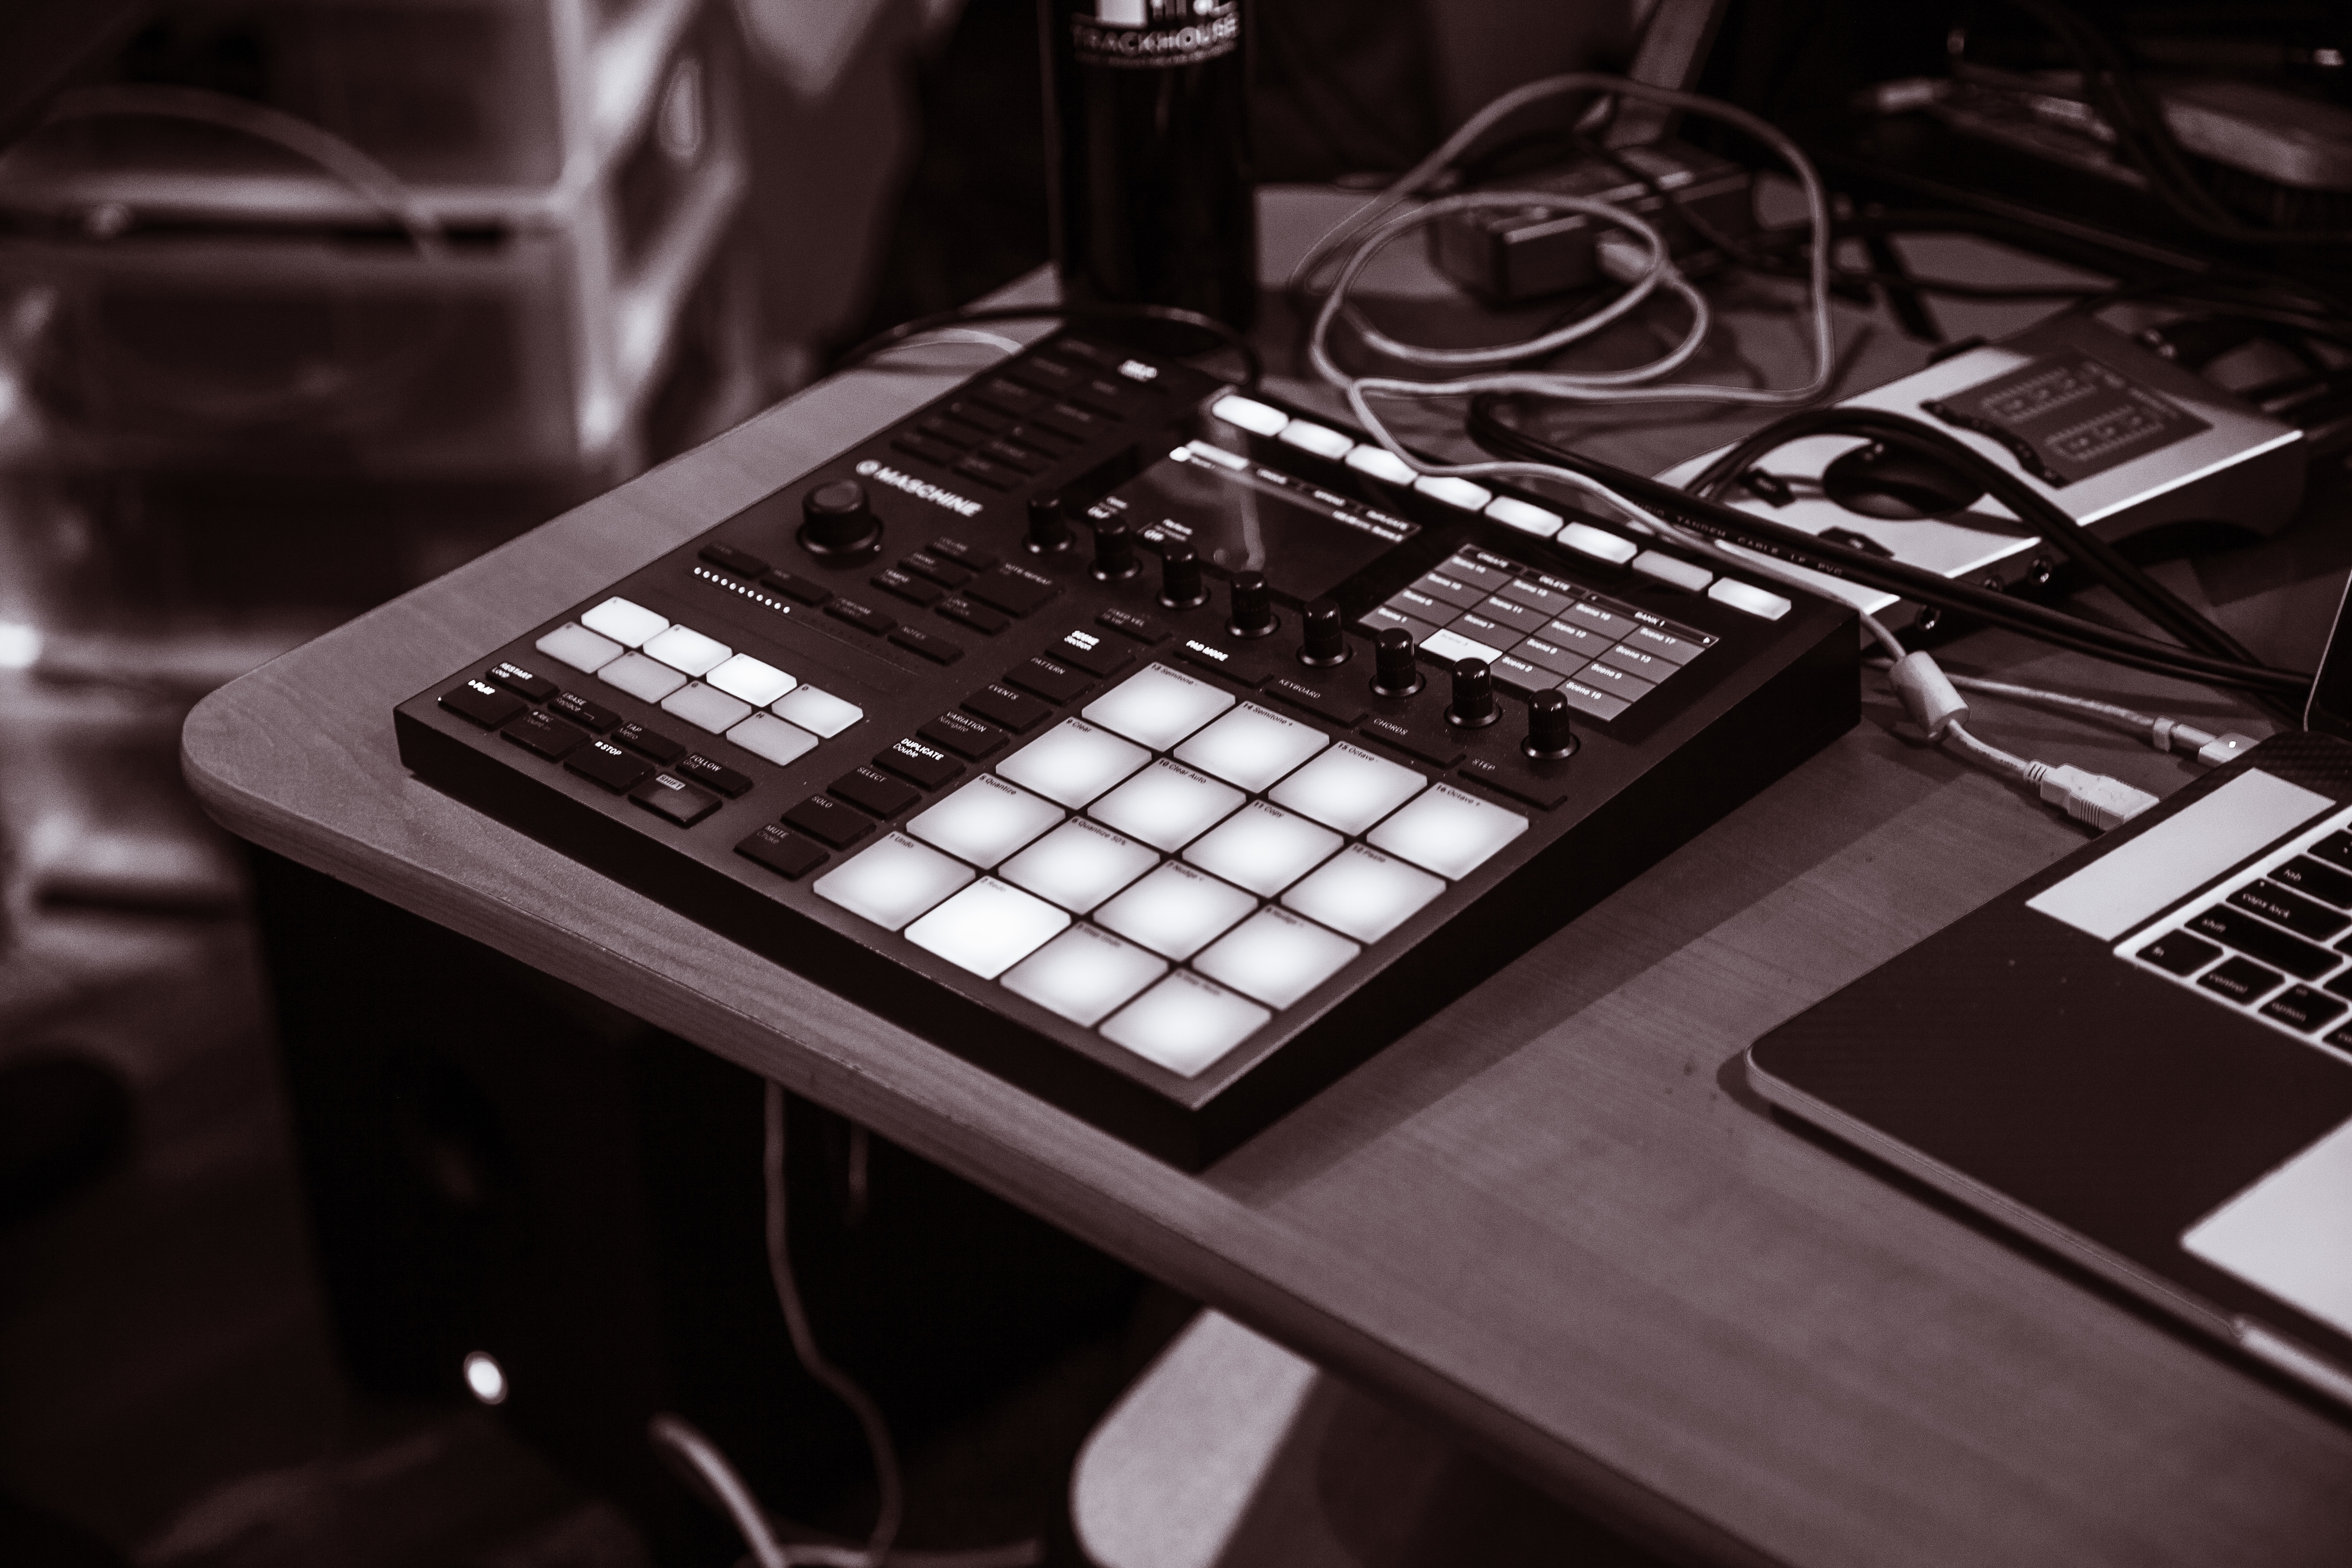 Grayscale shot of a drum pad machine for beats and sound design on a wooden table